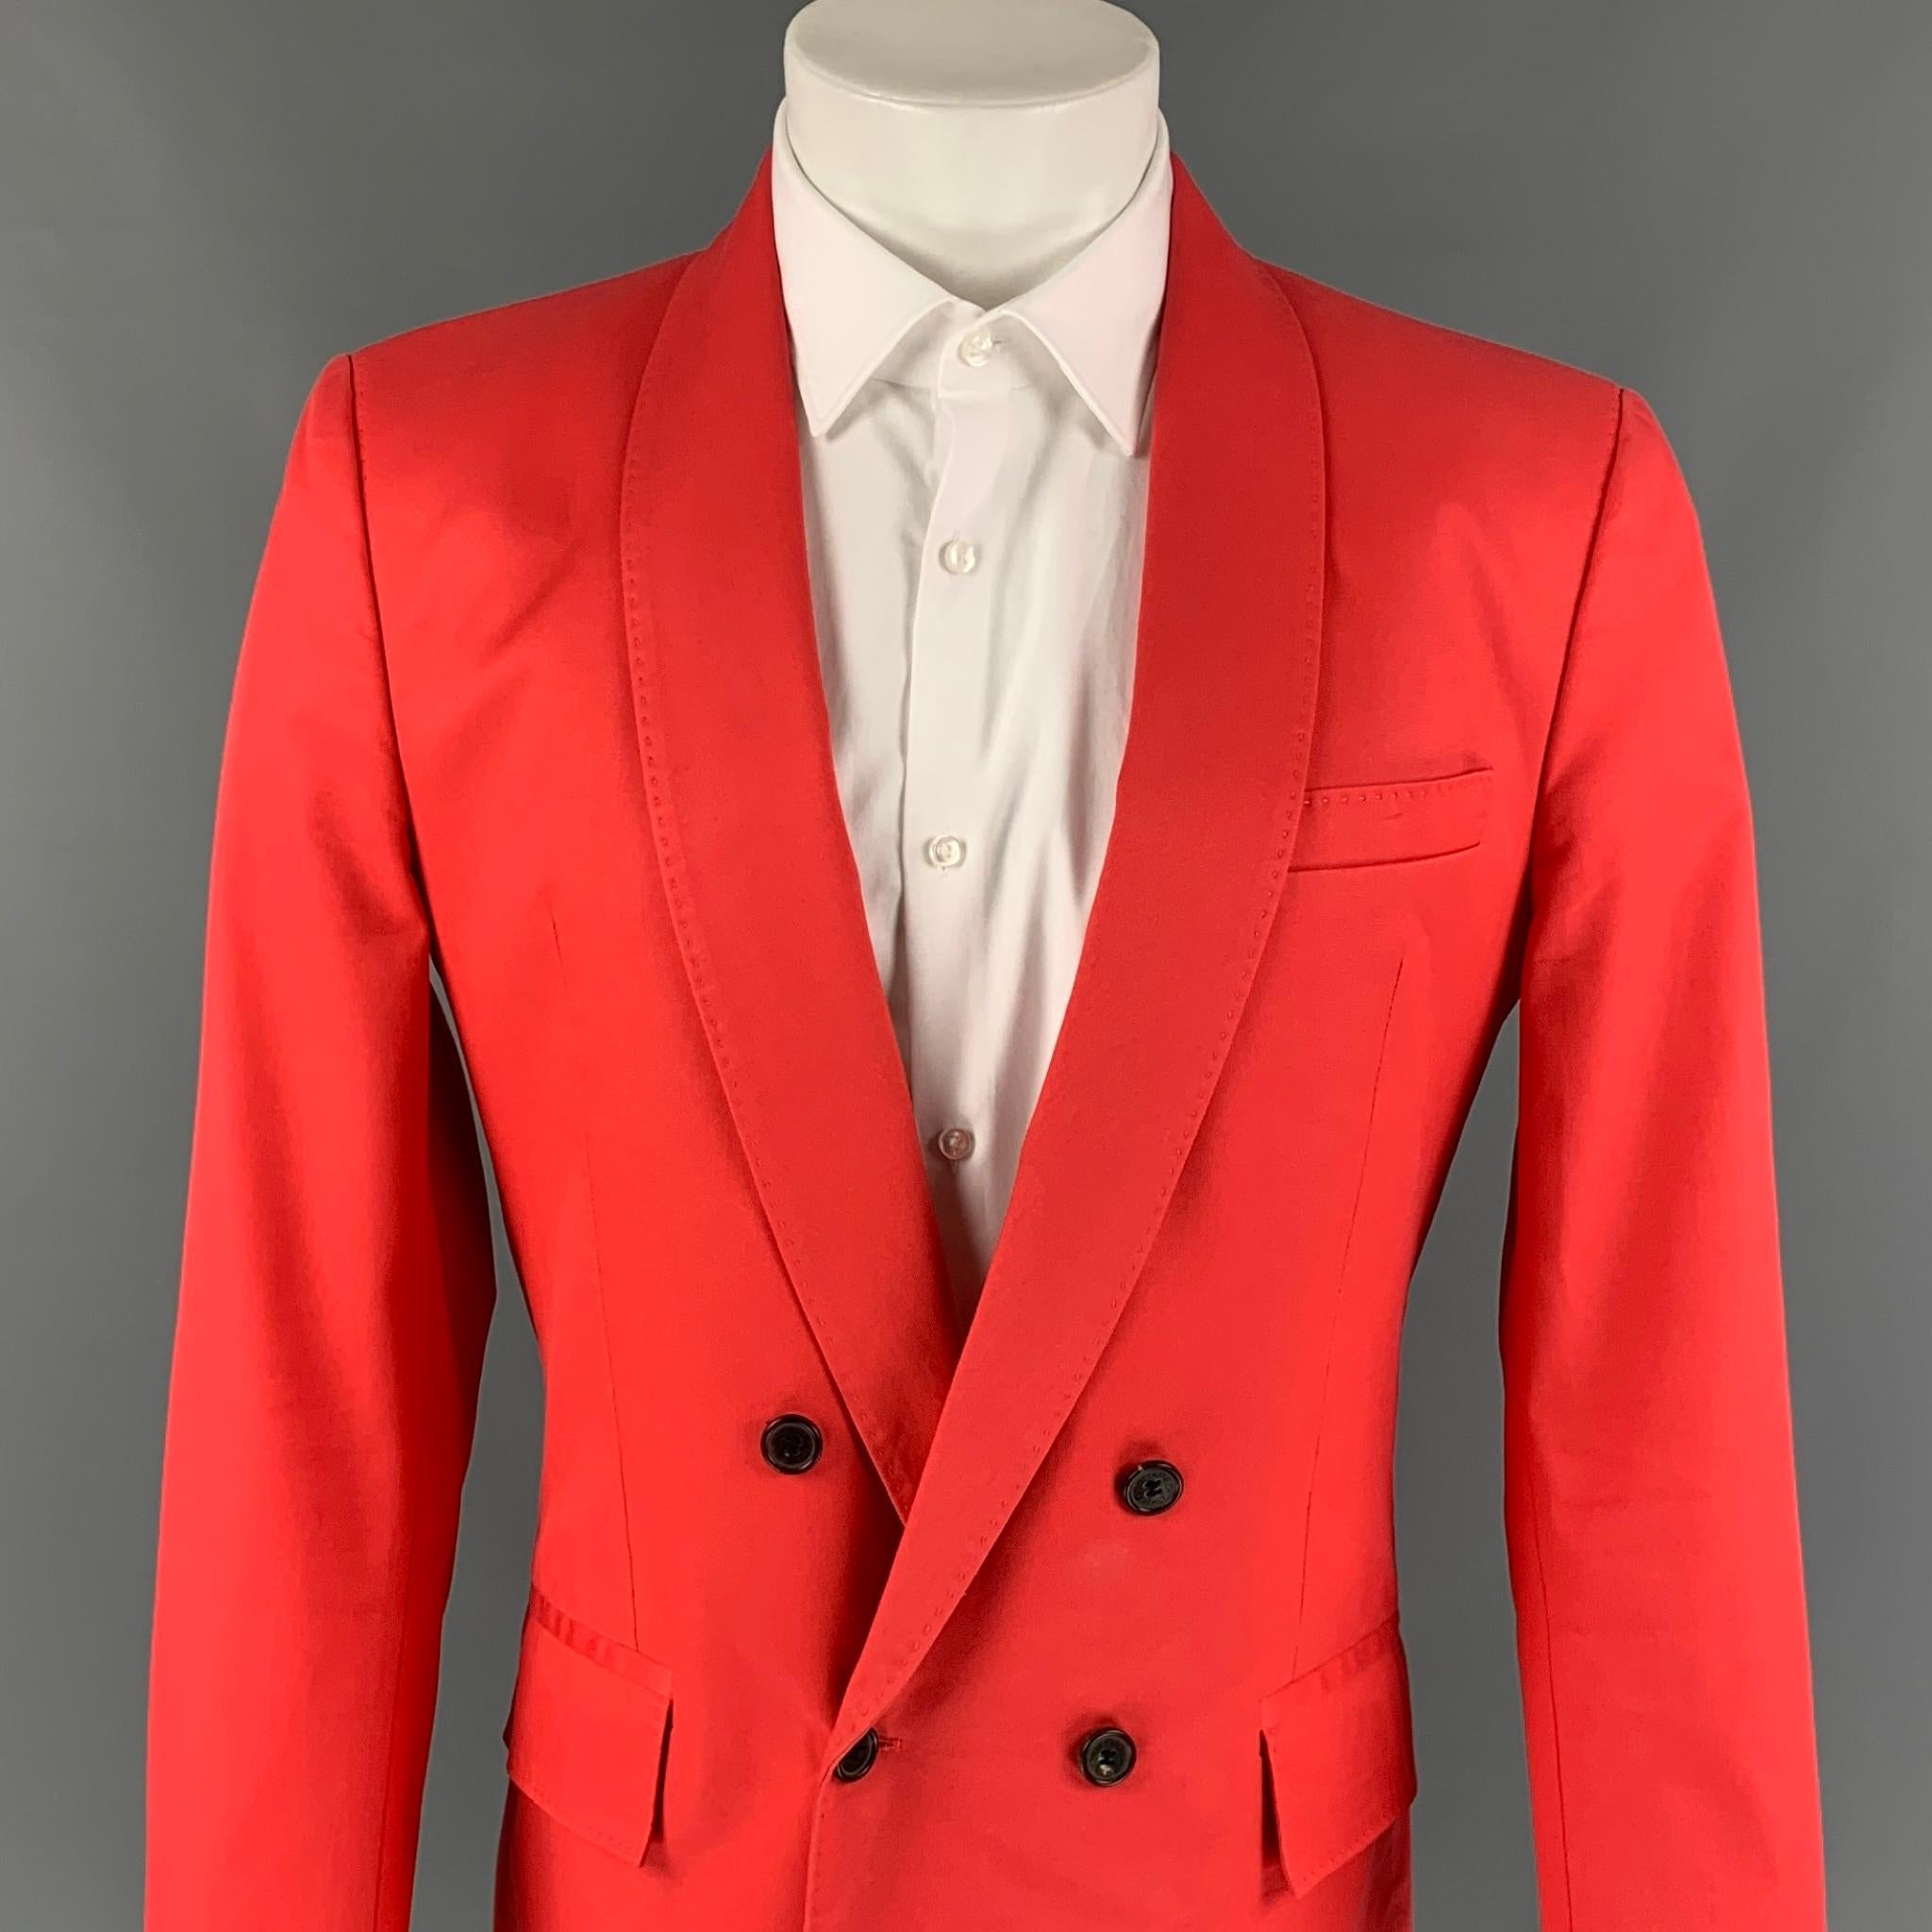 DSQUARED2 sport coat comes in a orange cotton with a full liner featuring a shawl collar, flap pockets, double back vent, and a double breasted closure. Made in Italy. 

Very Good Pre-Owned Condition.
Marked: 48

Measurements:

Shoulder: 17.5